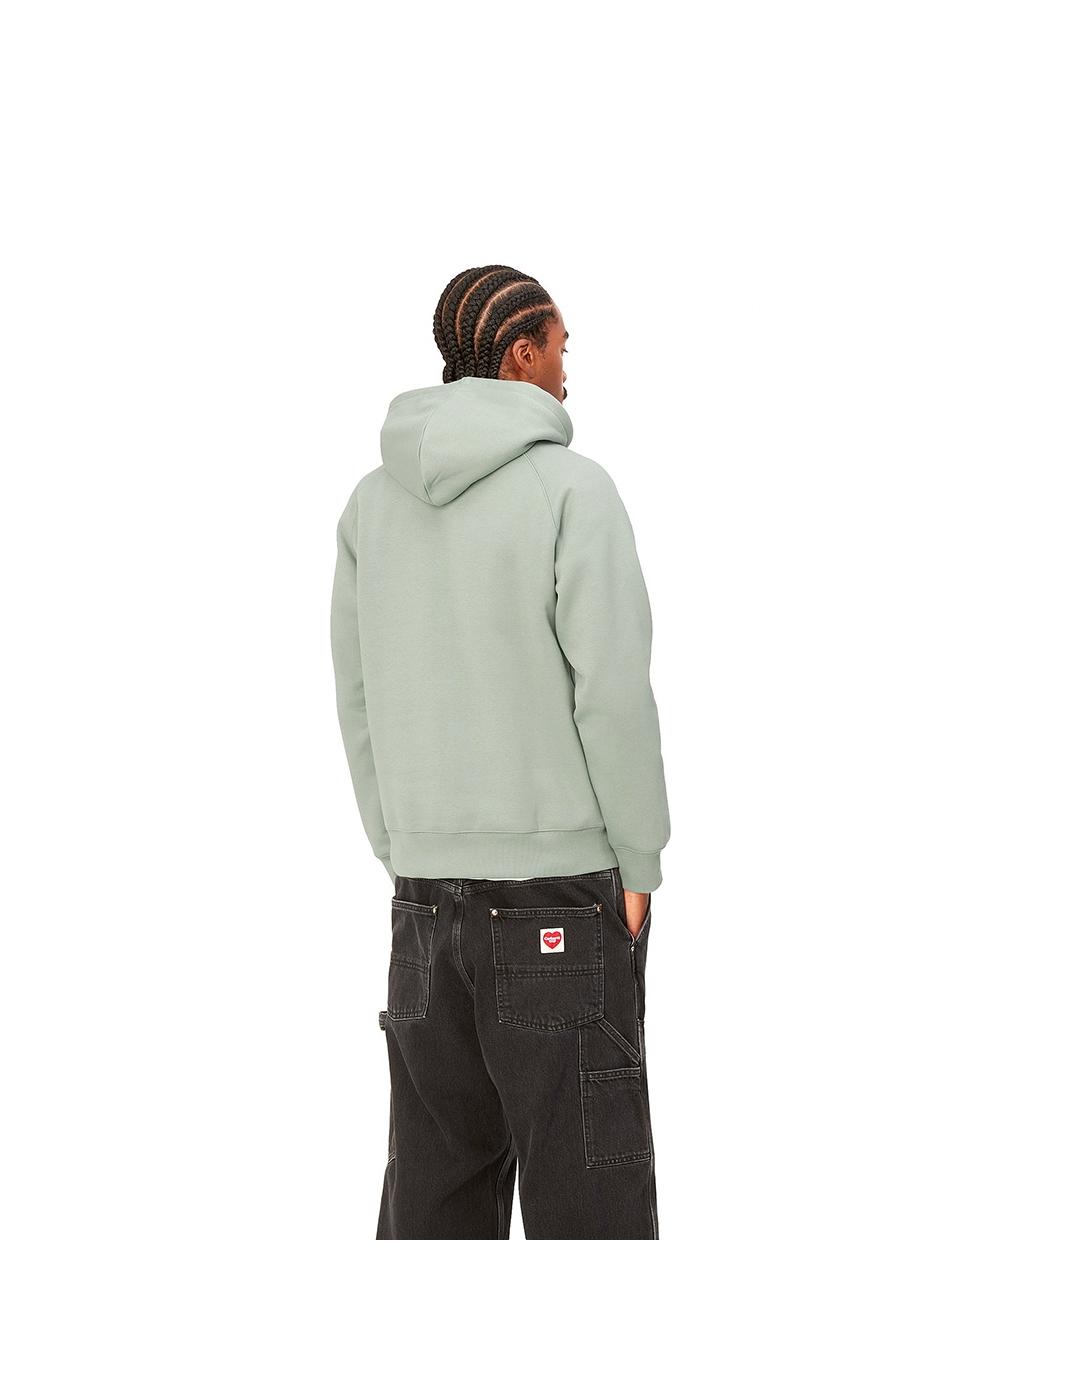 Sudadera Carhartt Wip Hooded Chase glassy teal/ go de hombre